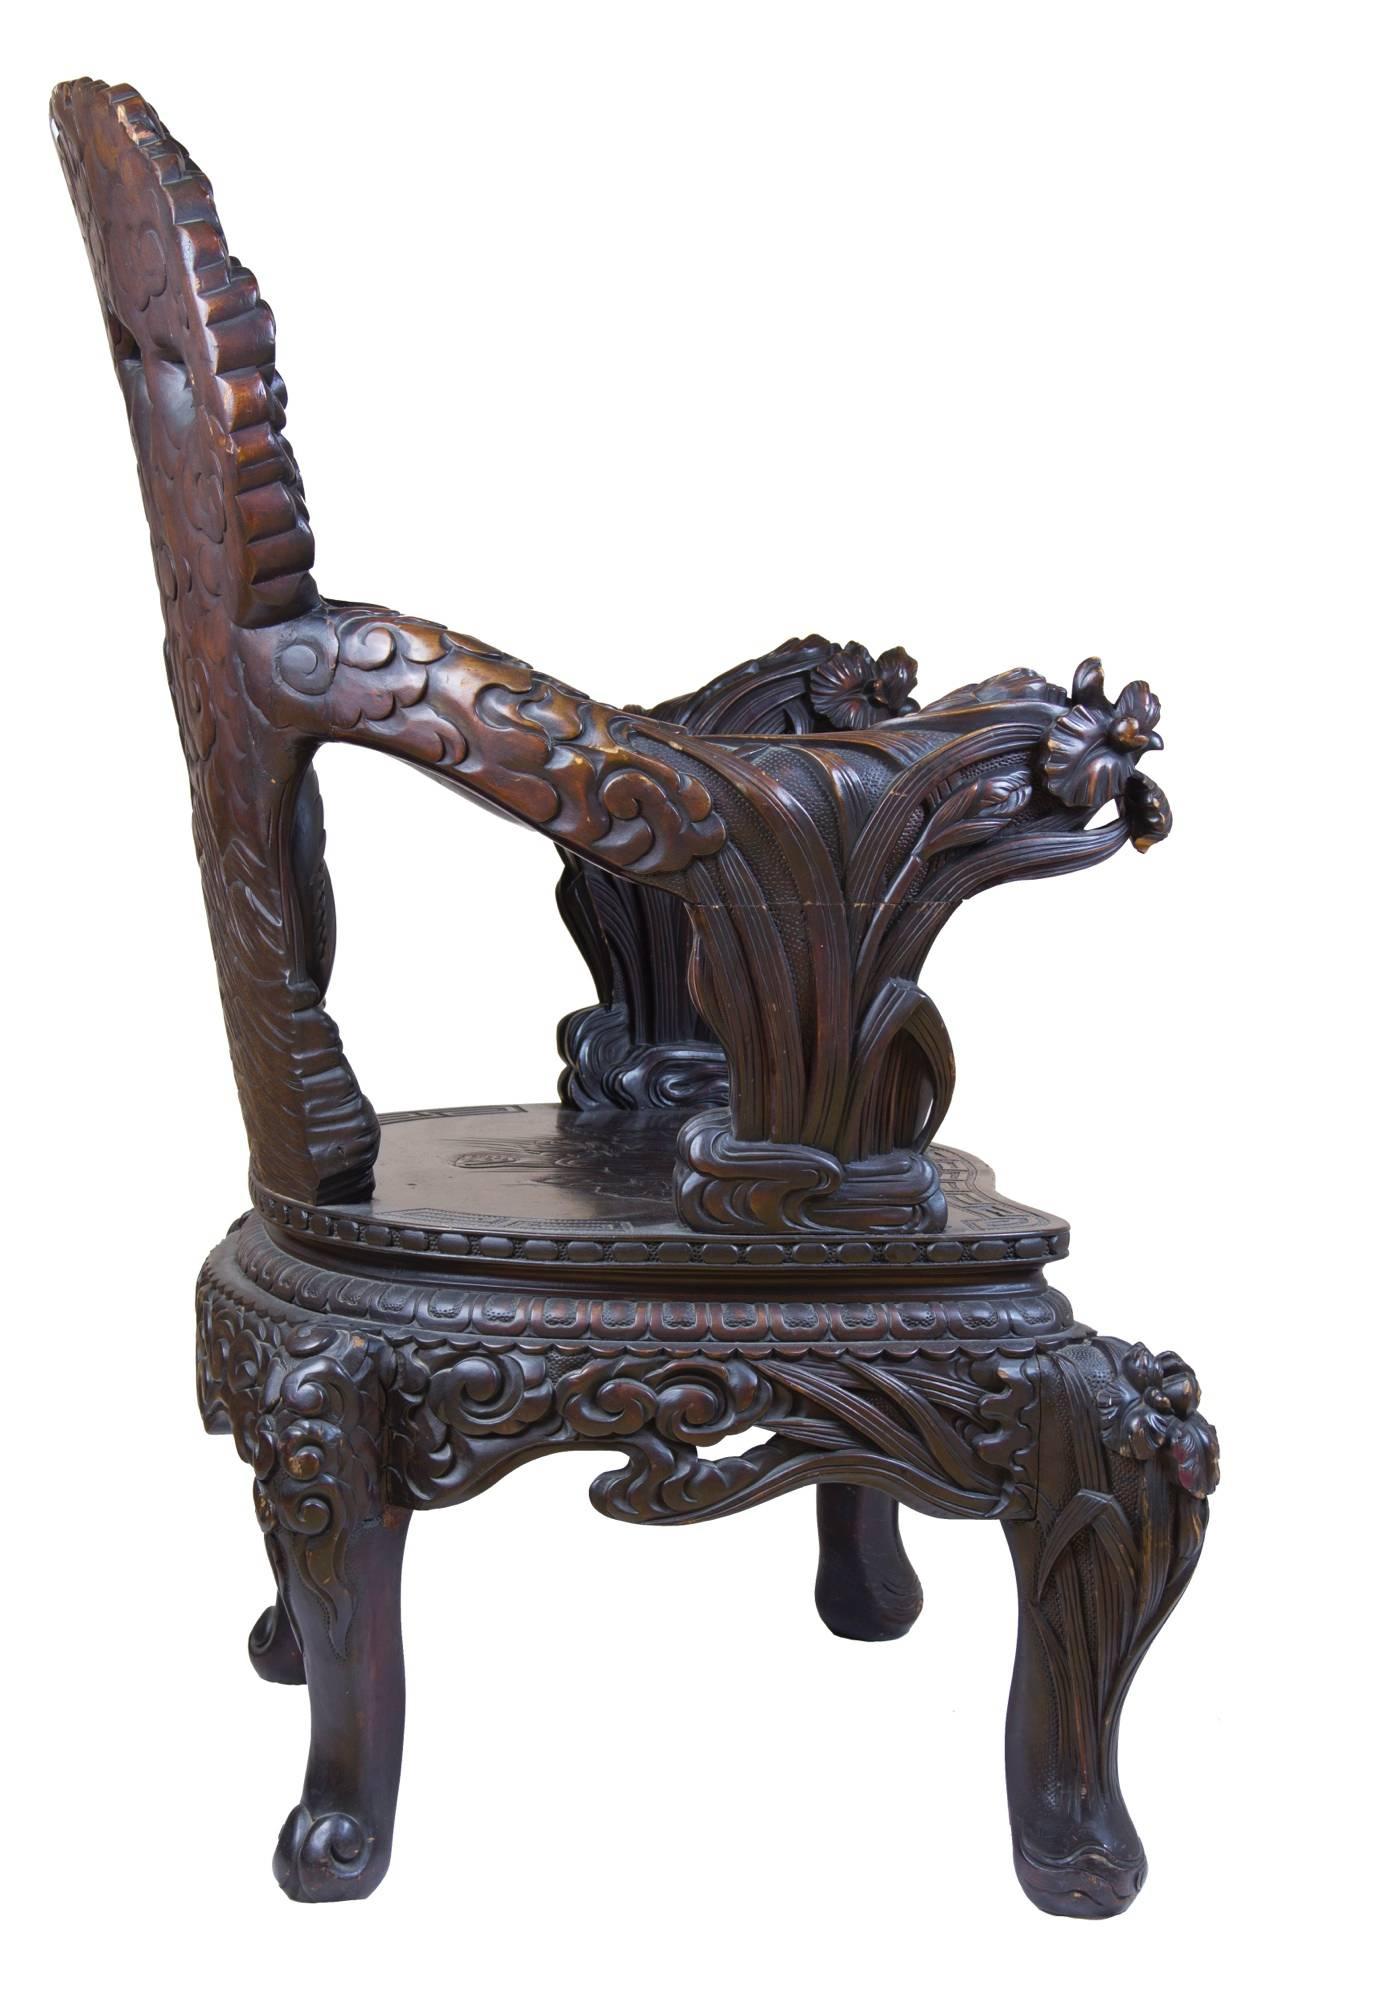 Chinese Export Exuberant Wood Armchair with Bird Motif and Floral Carving, Late 19th Century For Sale